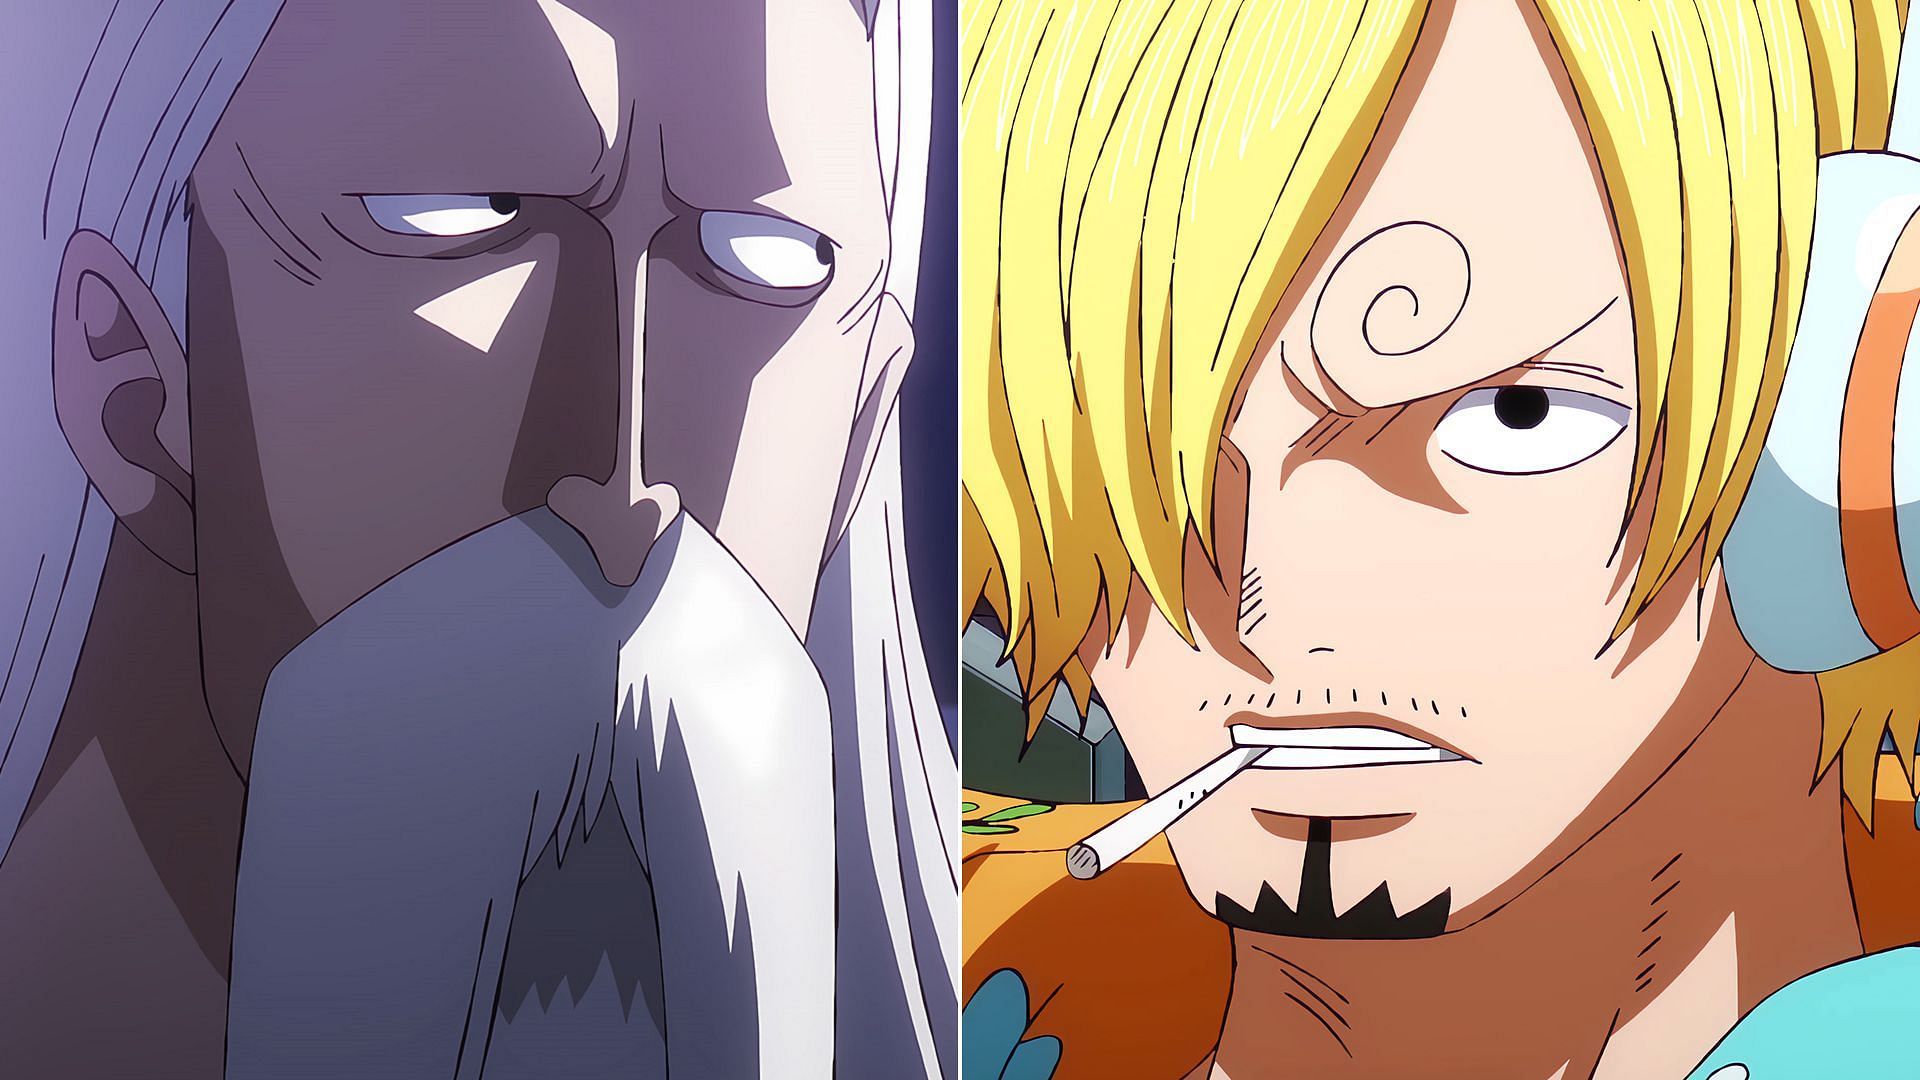 Mars and Sanji in the One Piece anime (Image via Toei Animation)